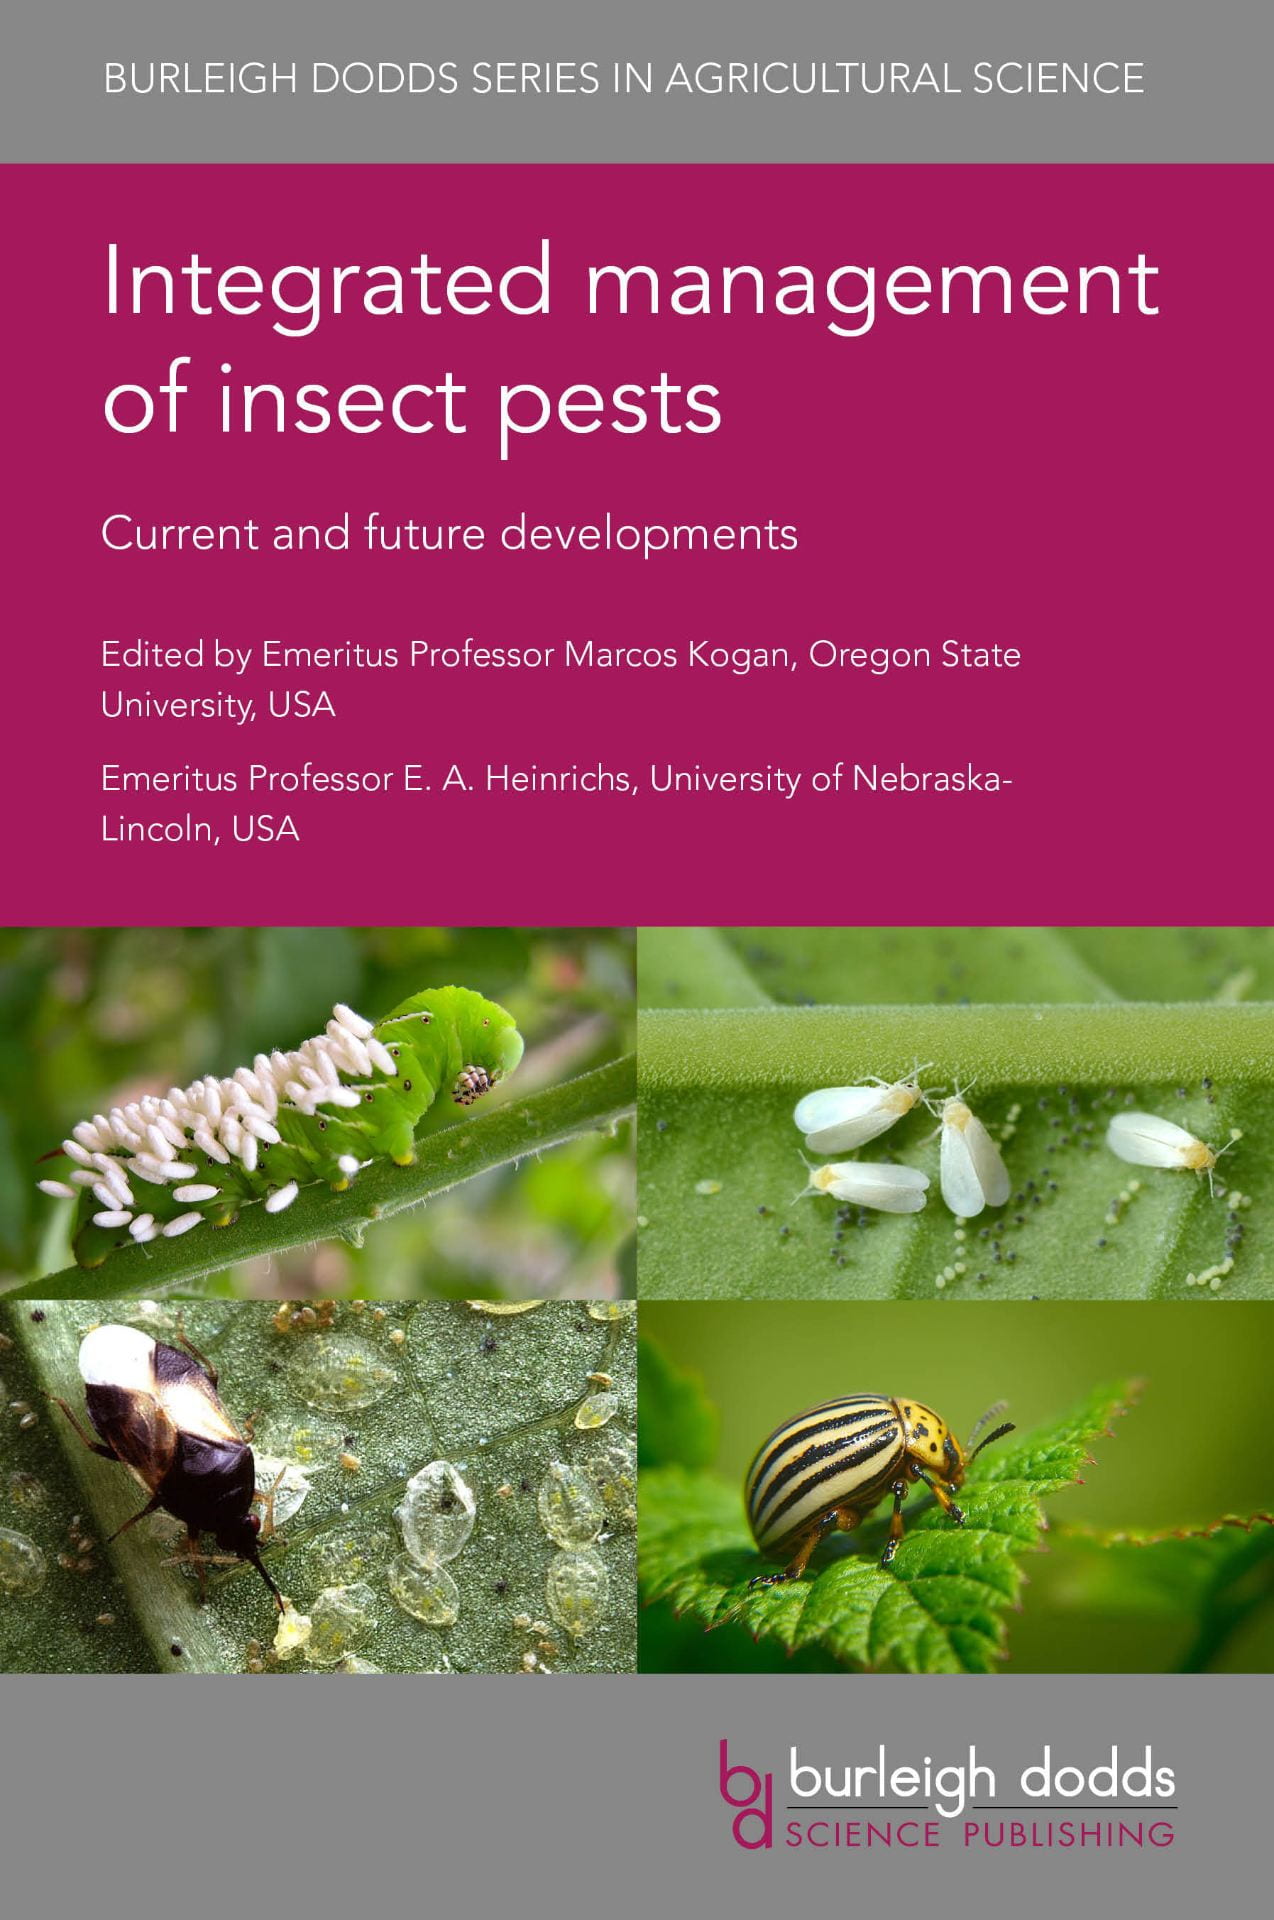 New publication: Ecological impacts of pesticides and their mitigation within IPM systems